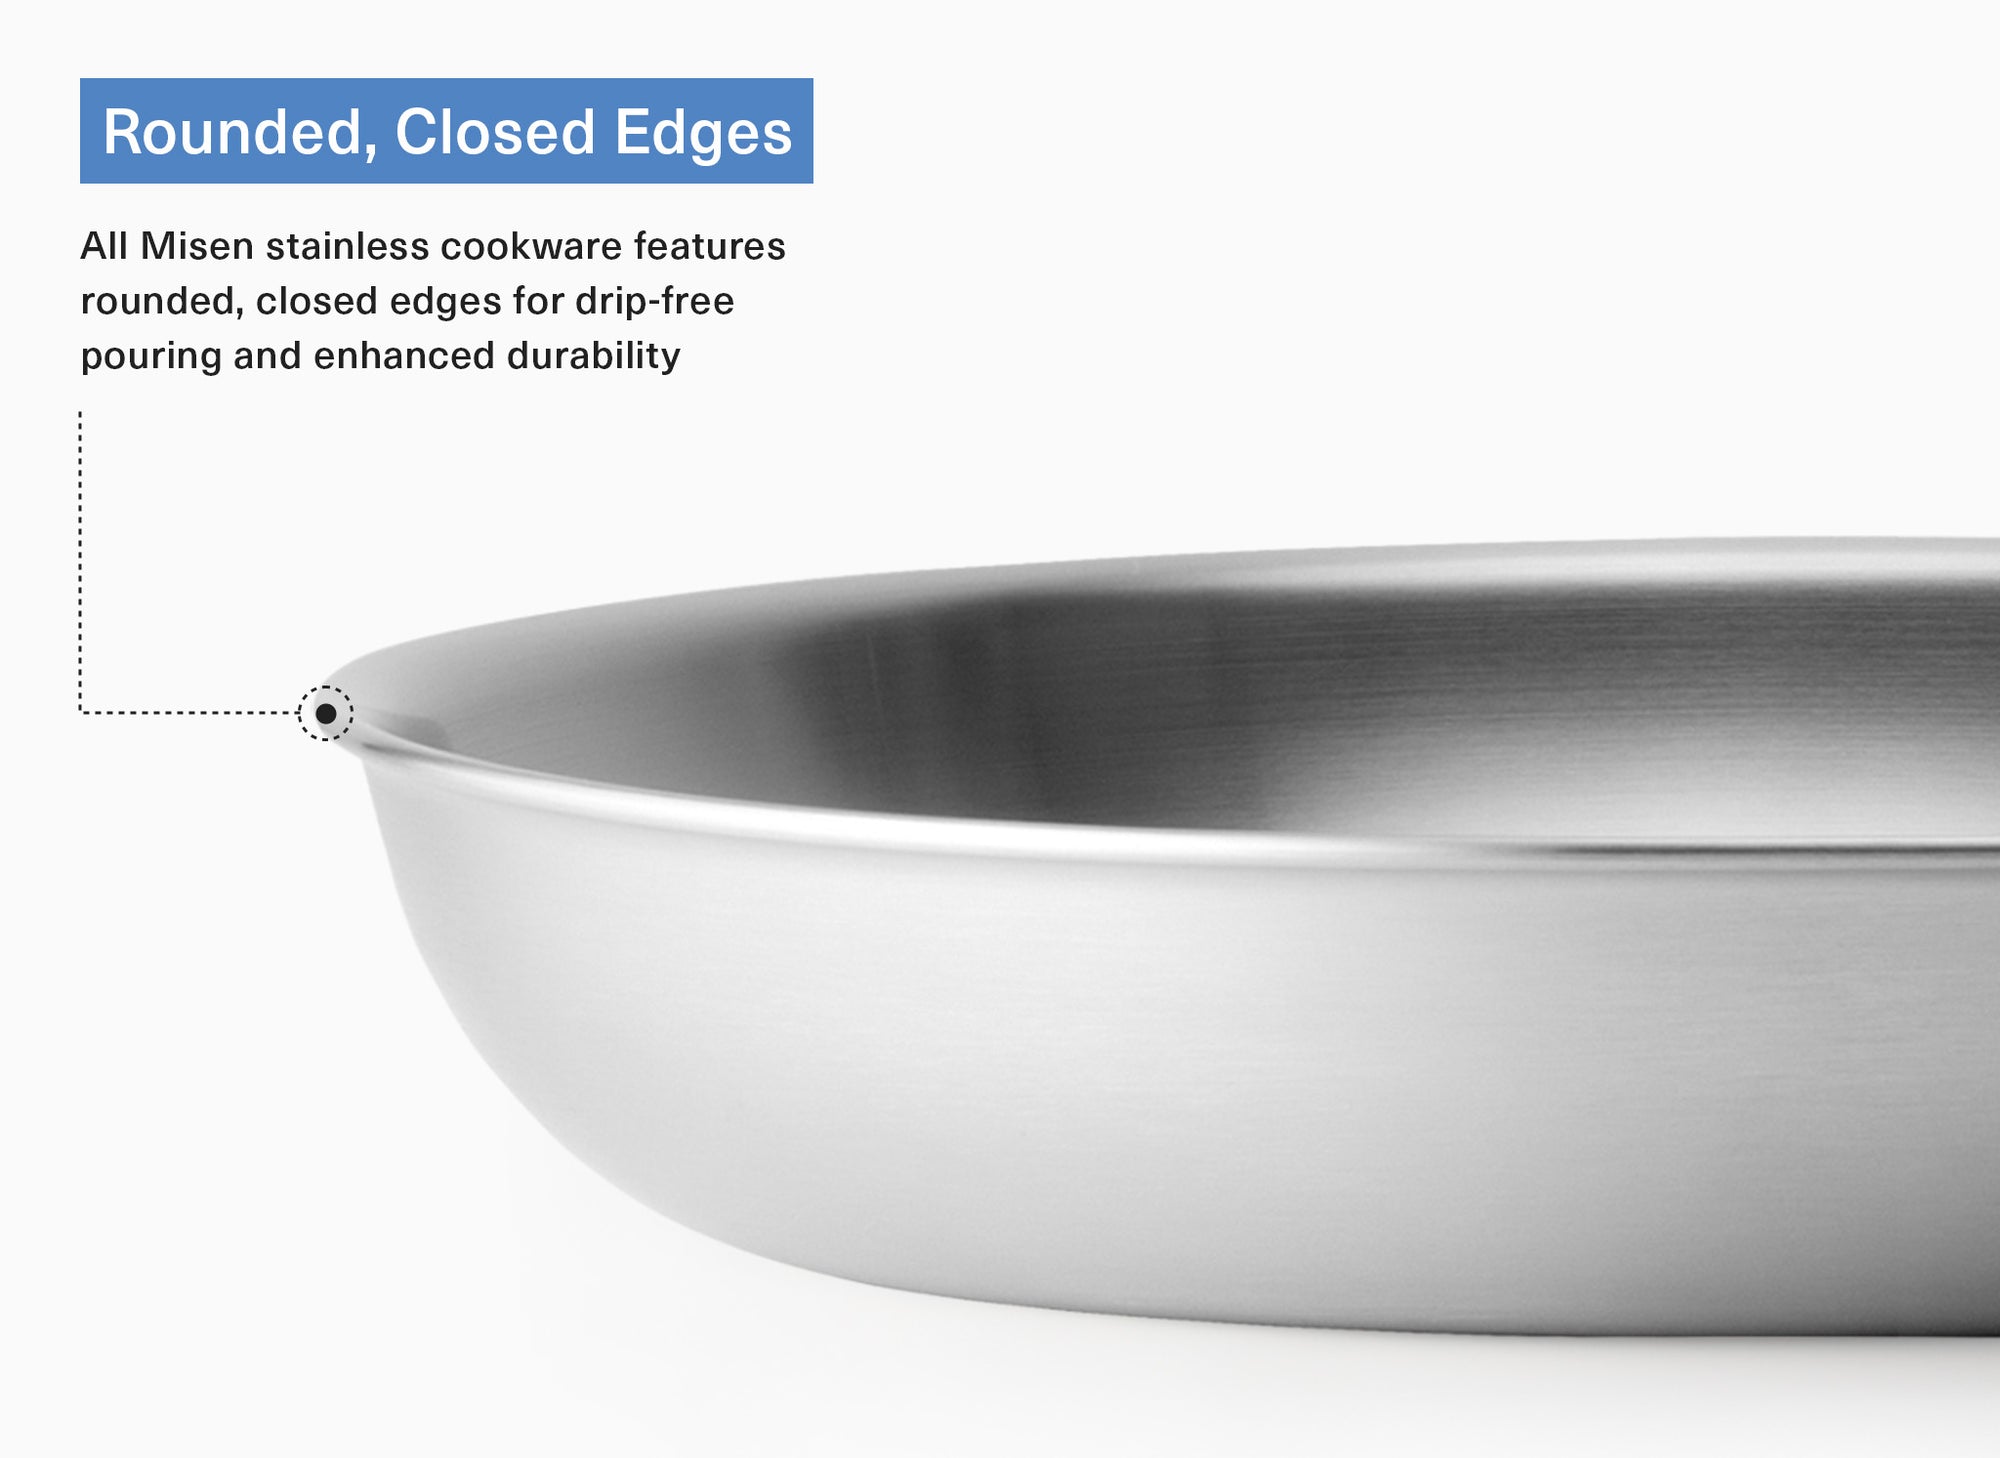 A diagram of the Misen Stainless Steel Pans’ rounded, closed edges for drip-free pouring and enhanced durability.